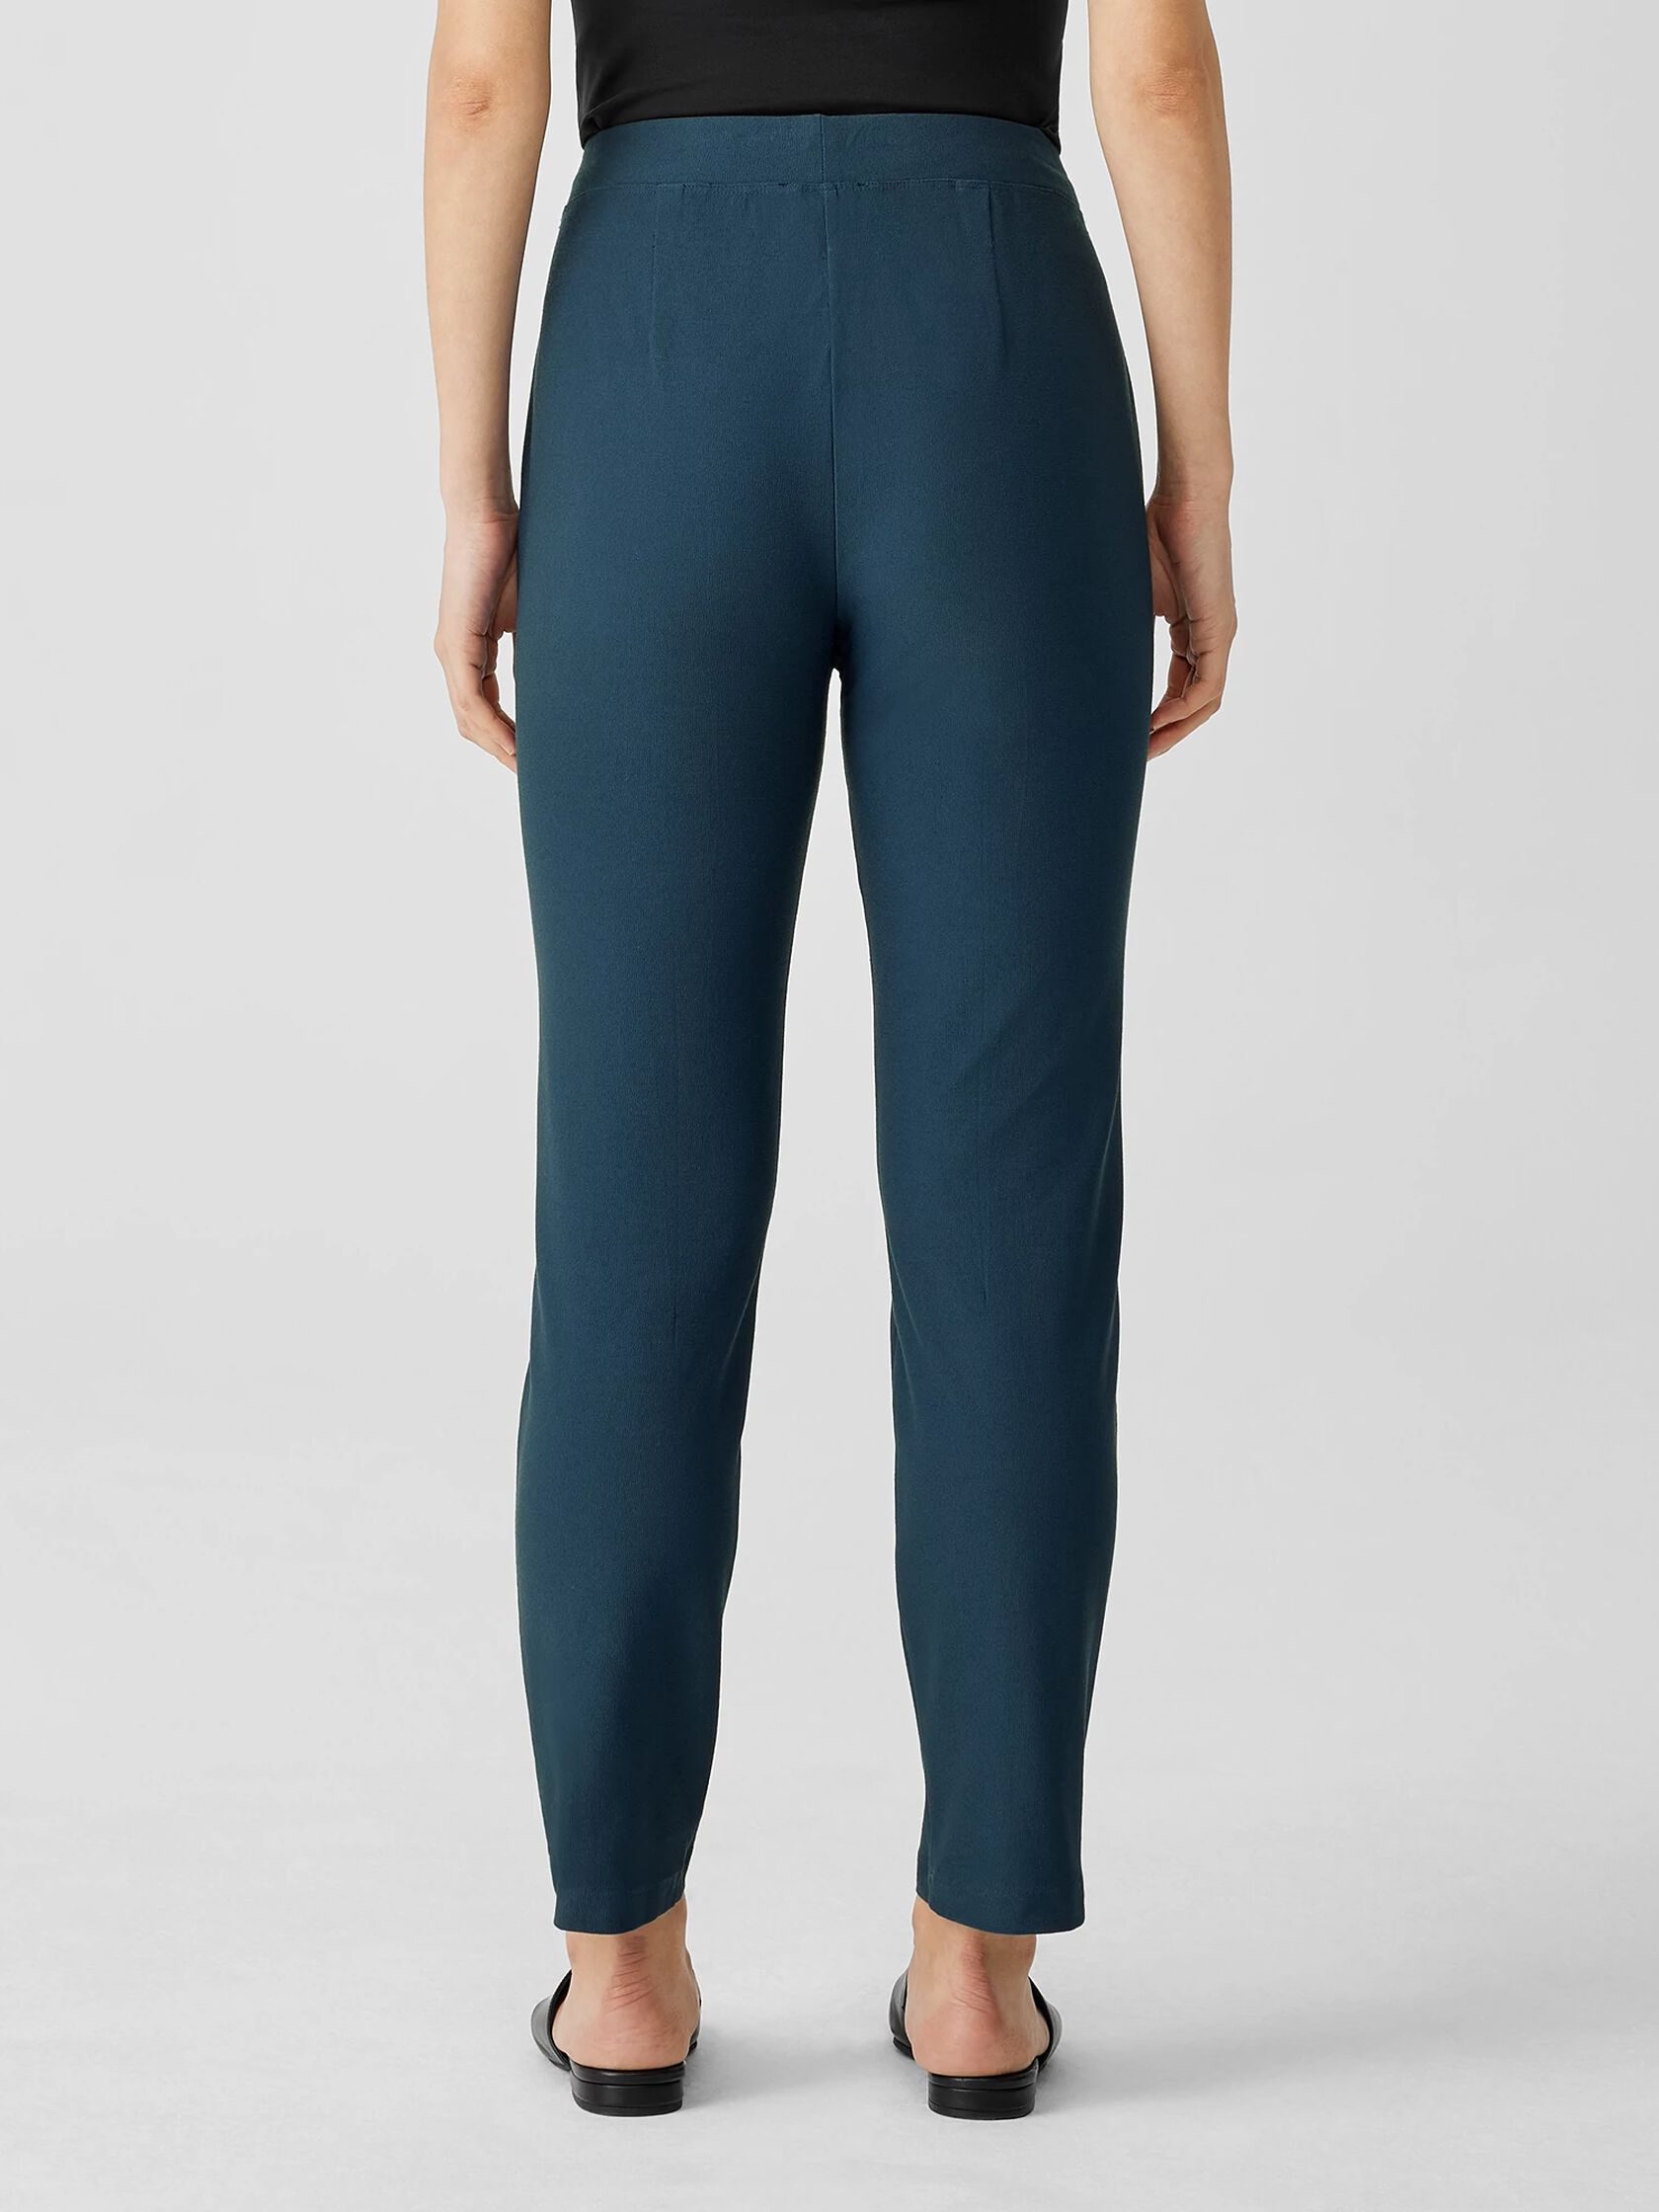 Washable Stretch Crepe Pant | EILEEN FISHER